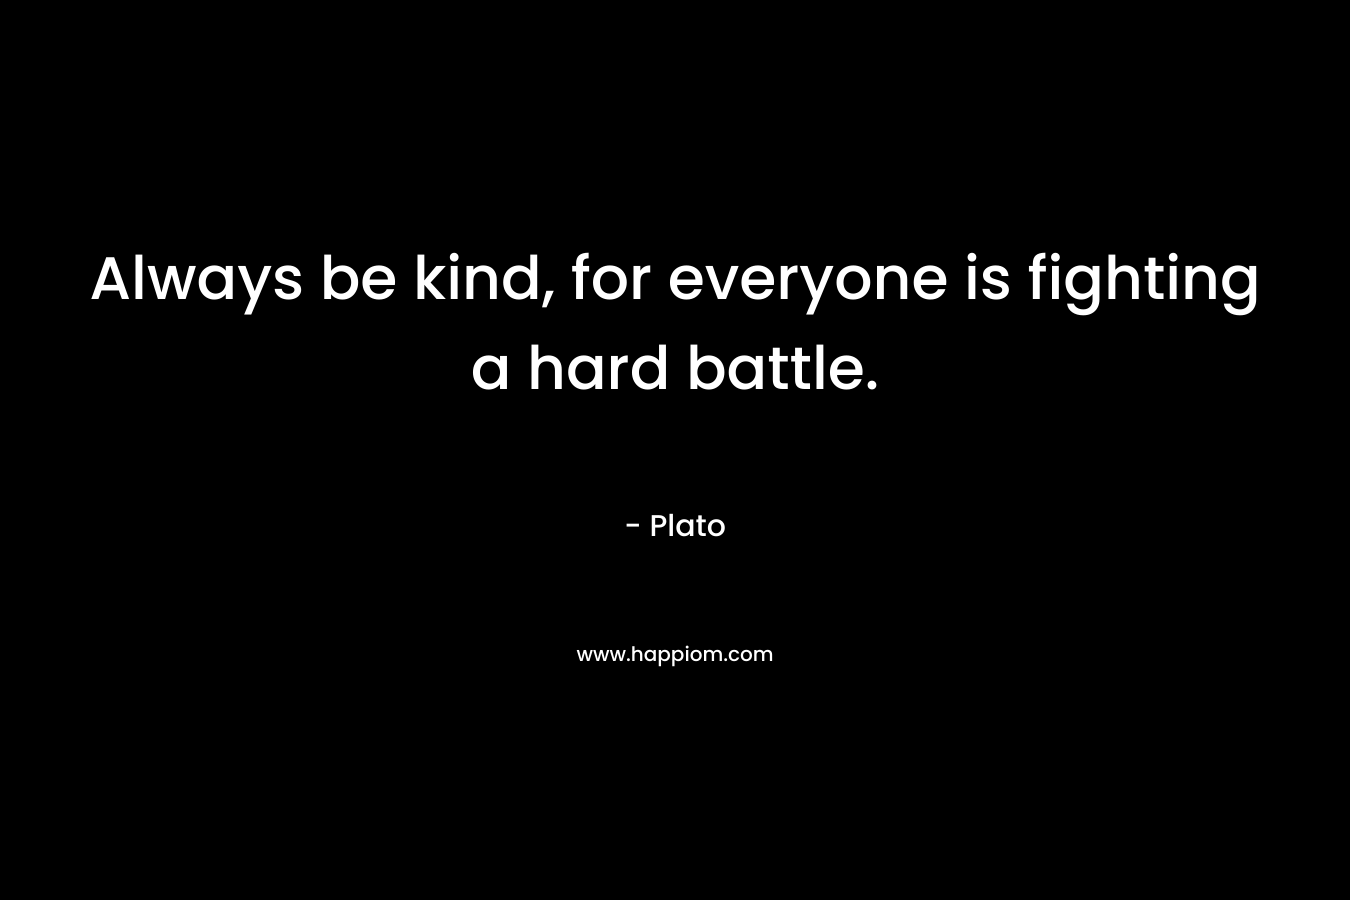 Always be kind, for everyone is fighting a hard battle.